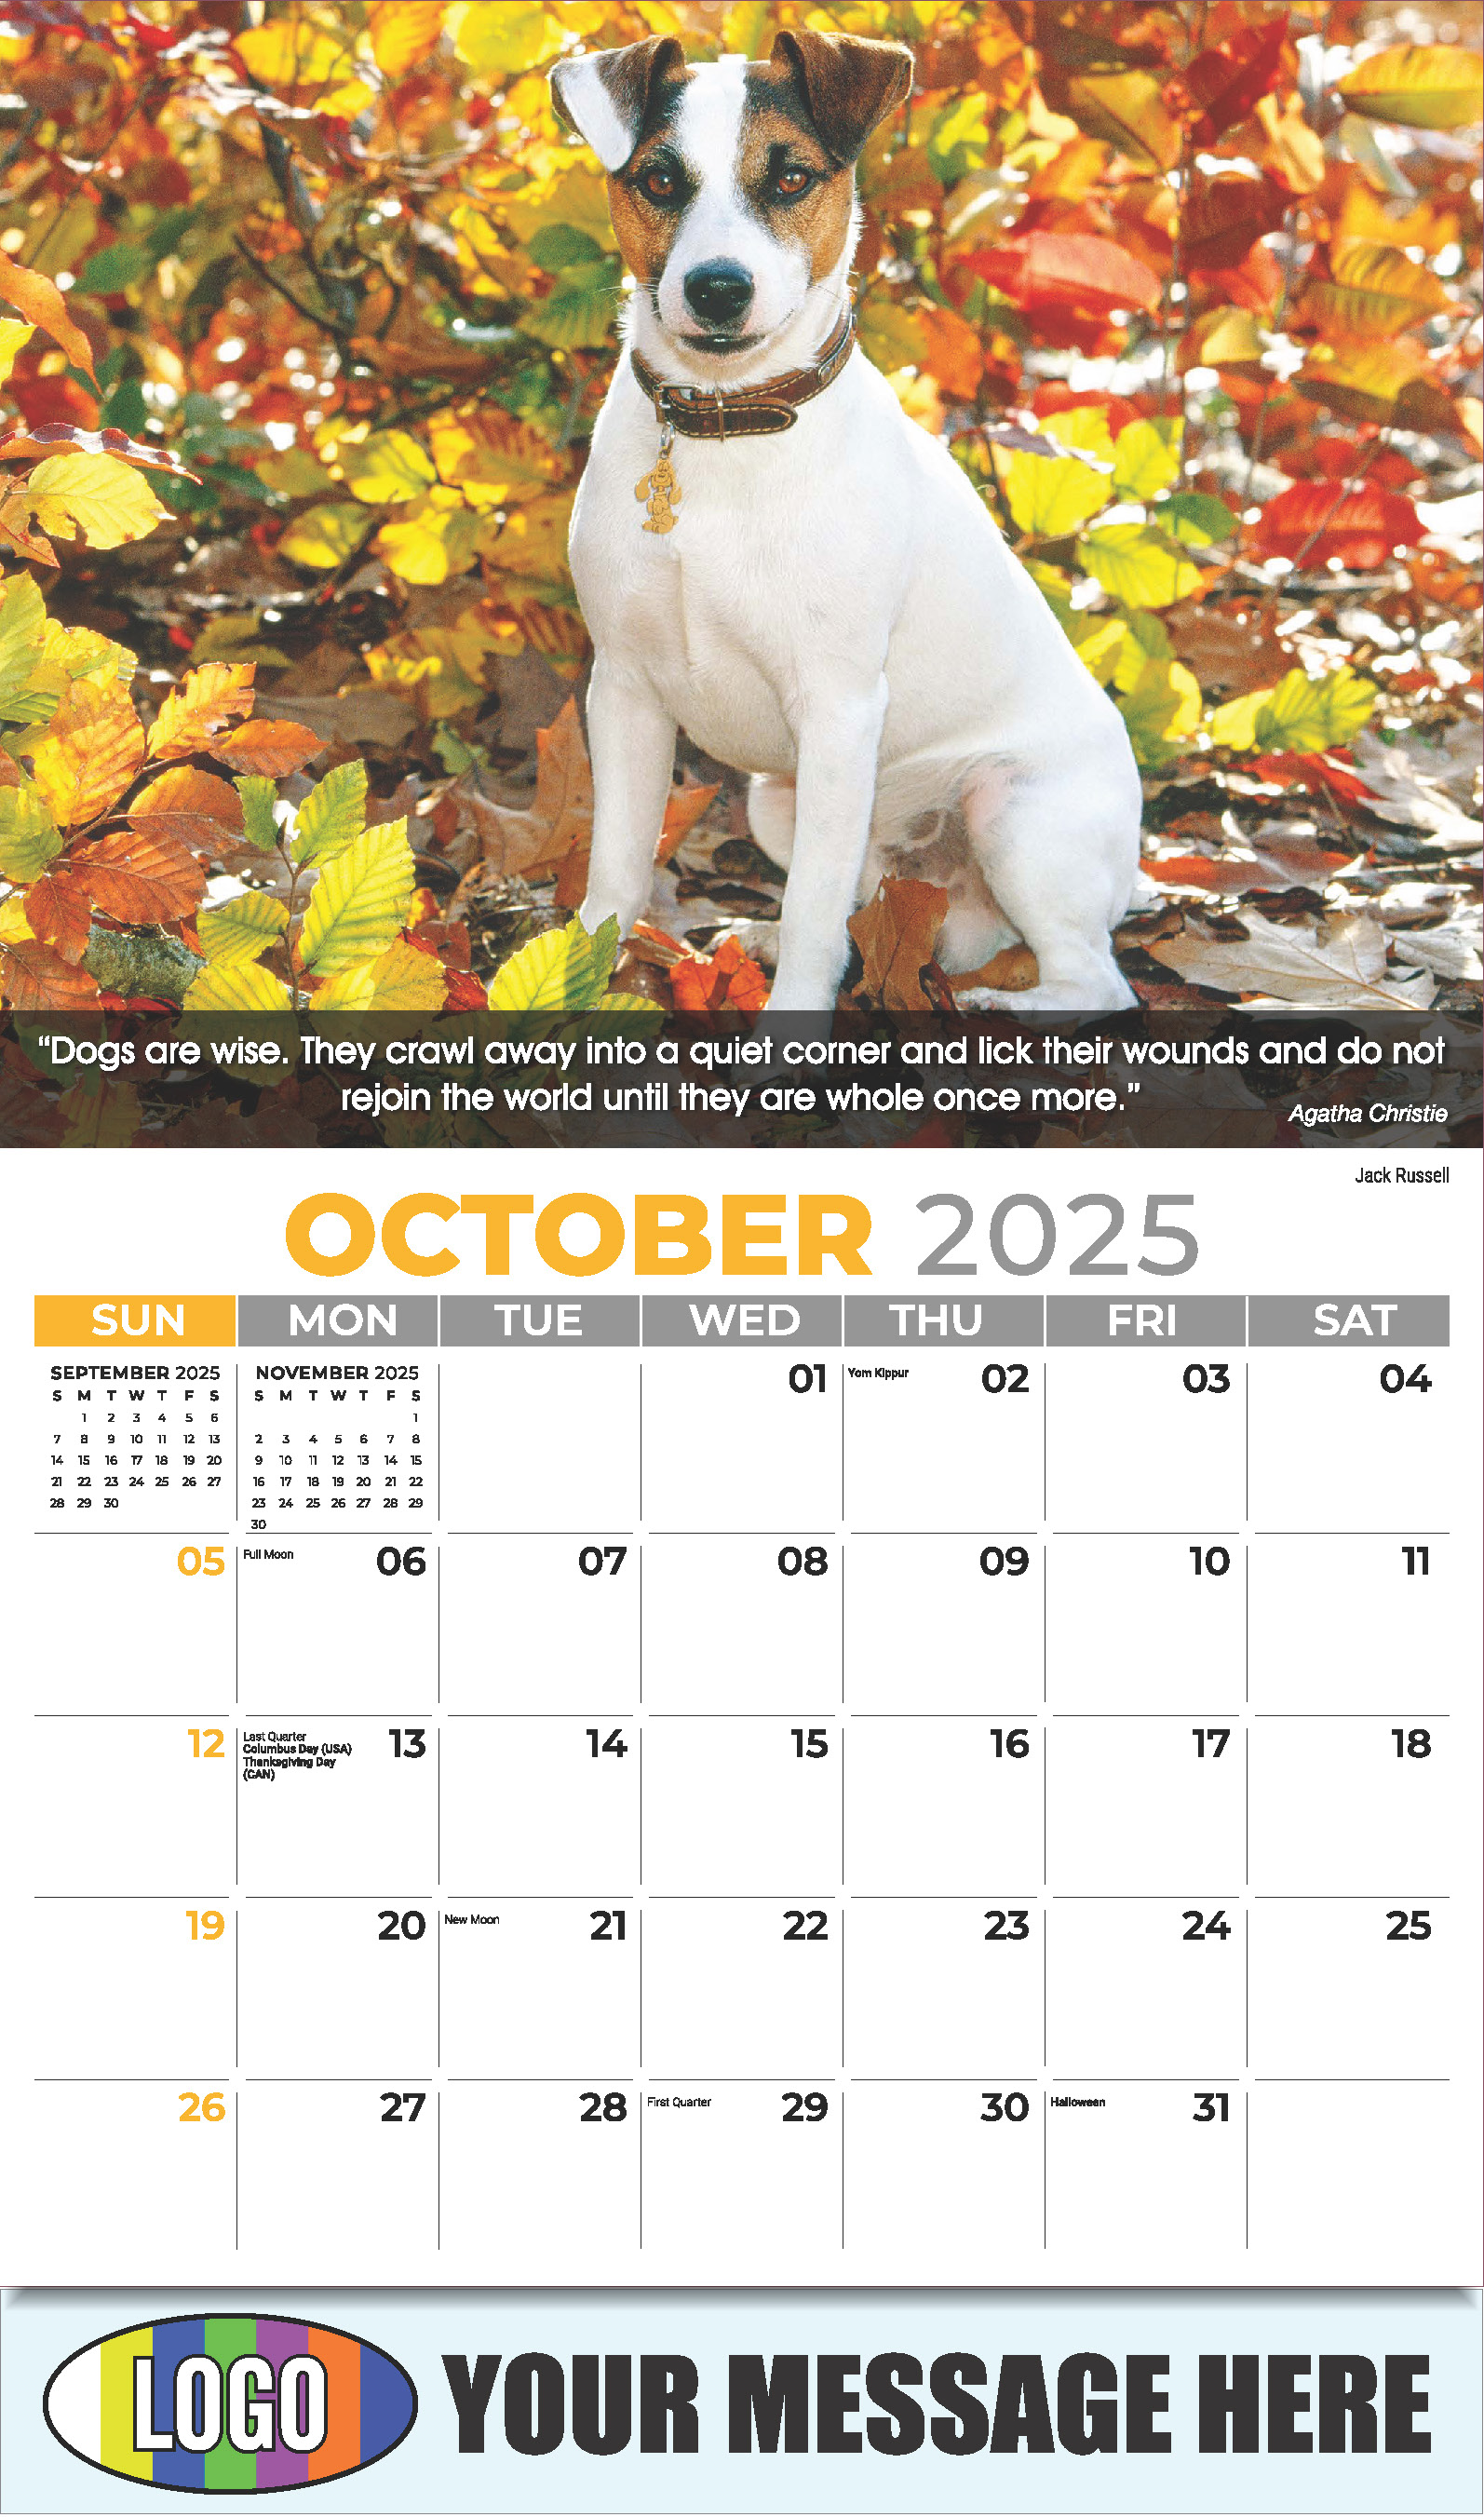 Dogs 2025 Vets and Pets Business Promotion Calendar - October